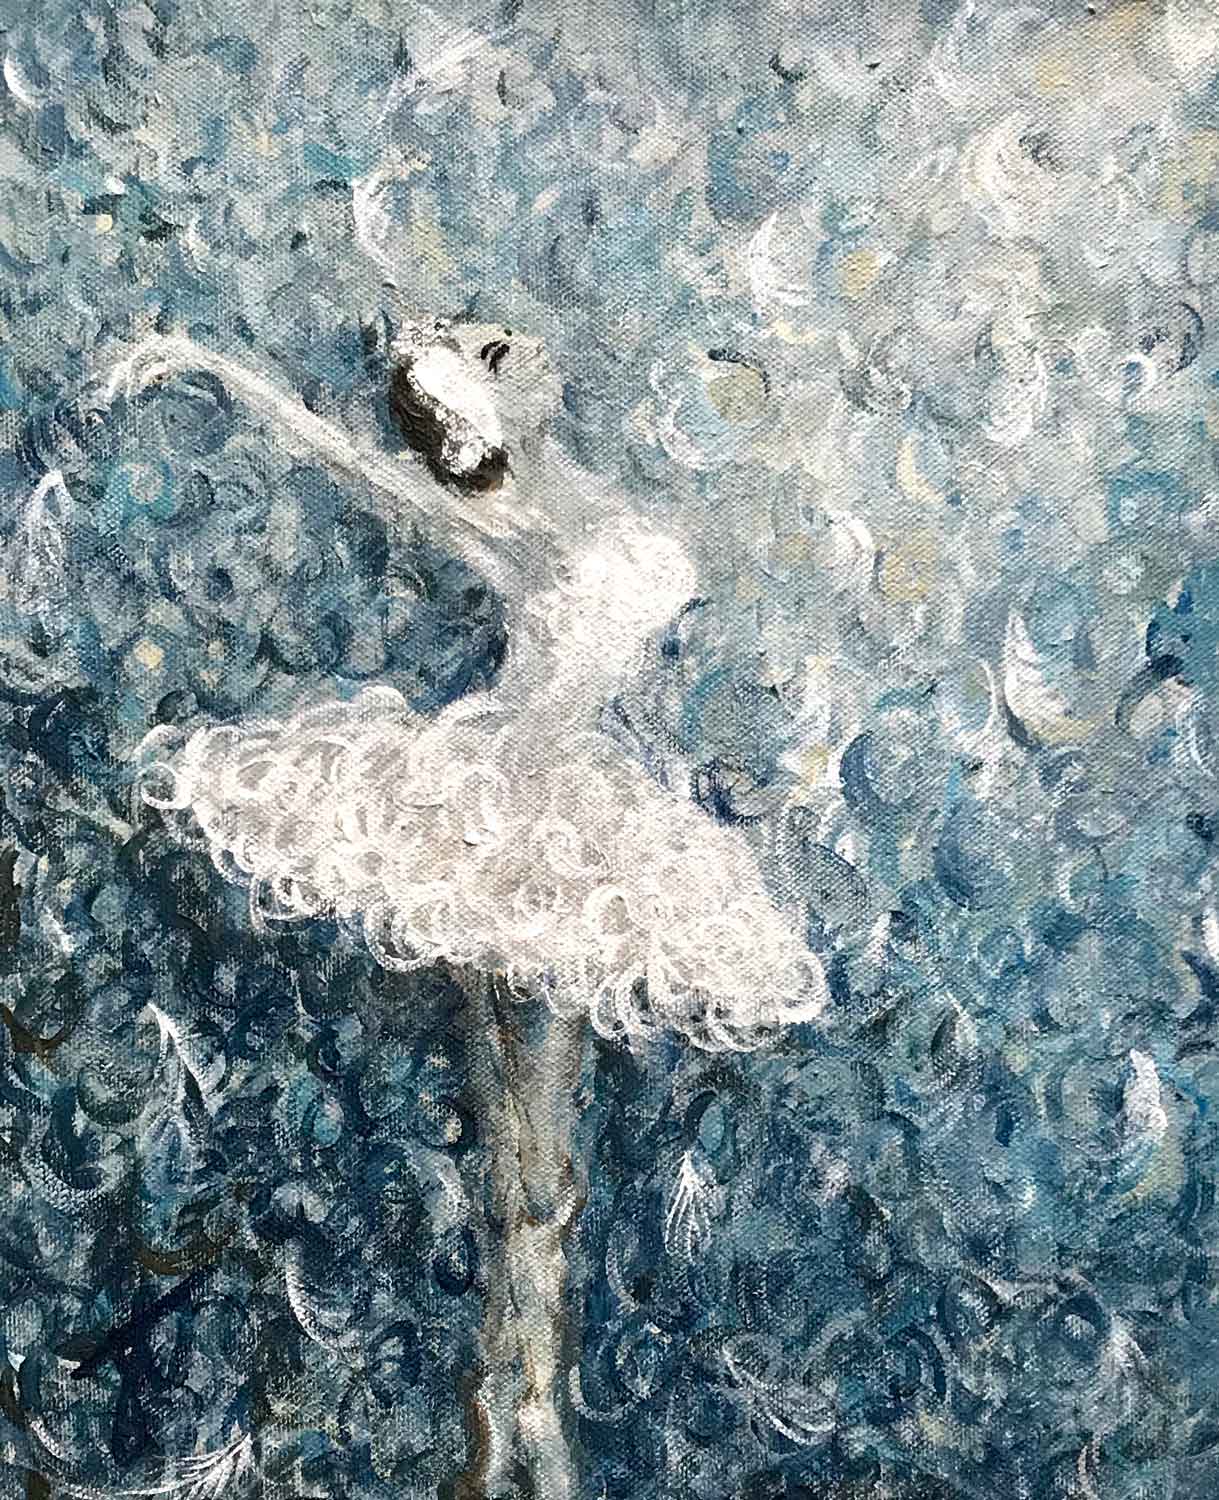 Painting cropped to edge: side view of ballerina in white swan costume. The painting comprises many layers of softly coloured feathers.